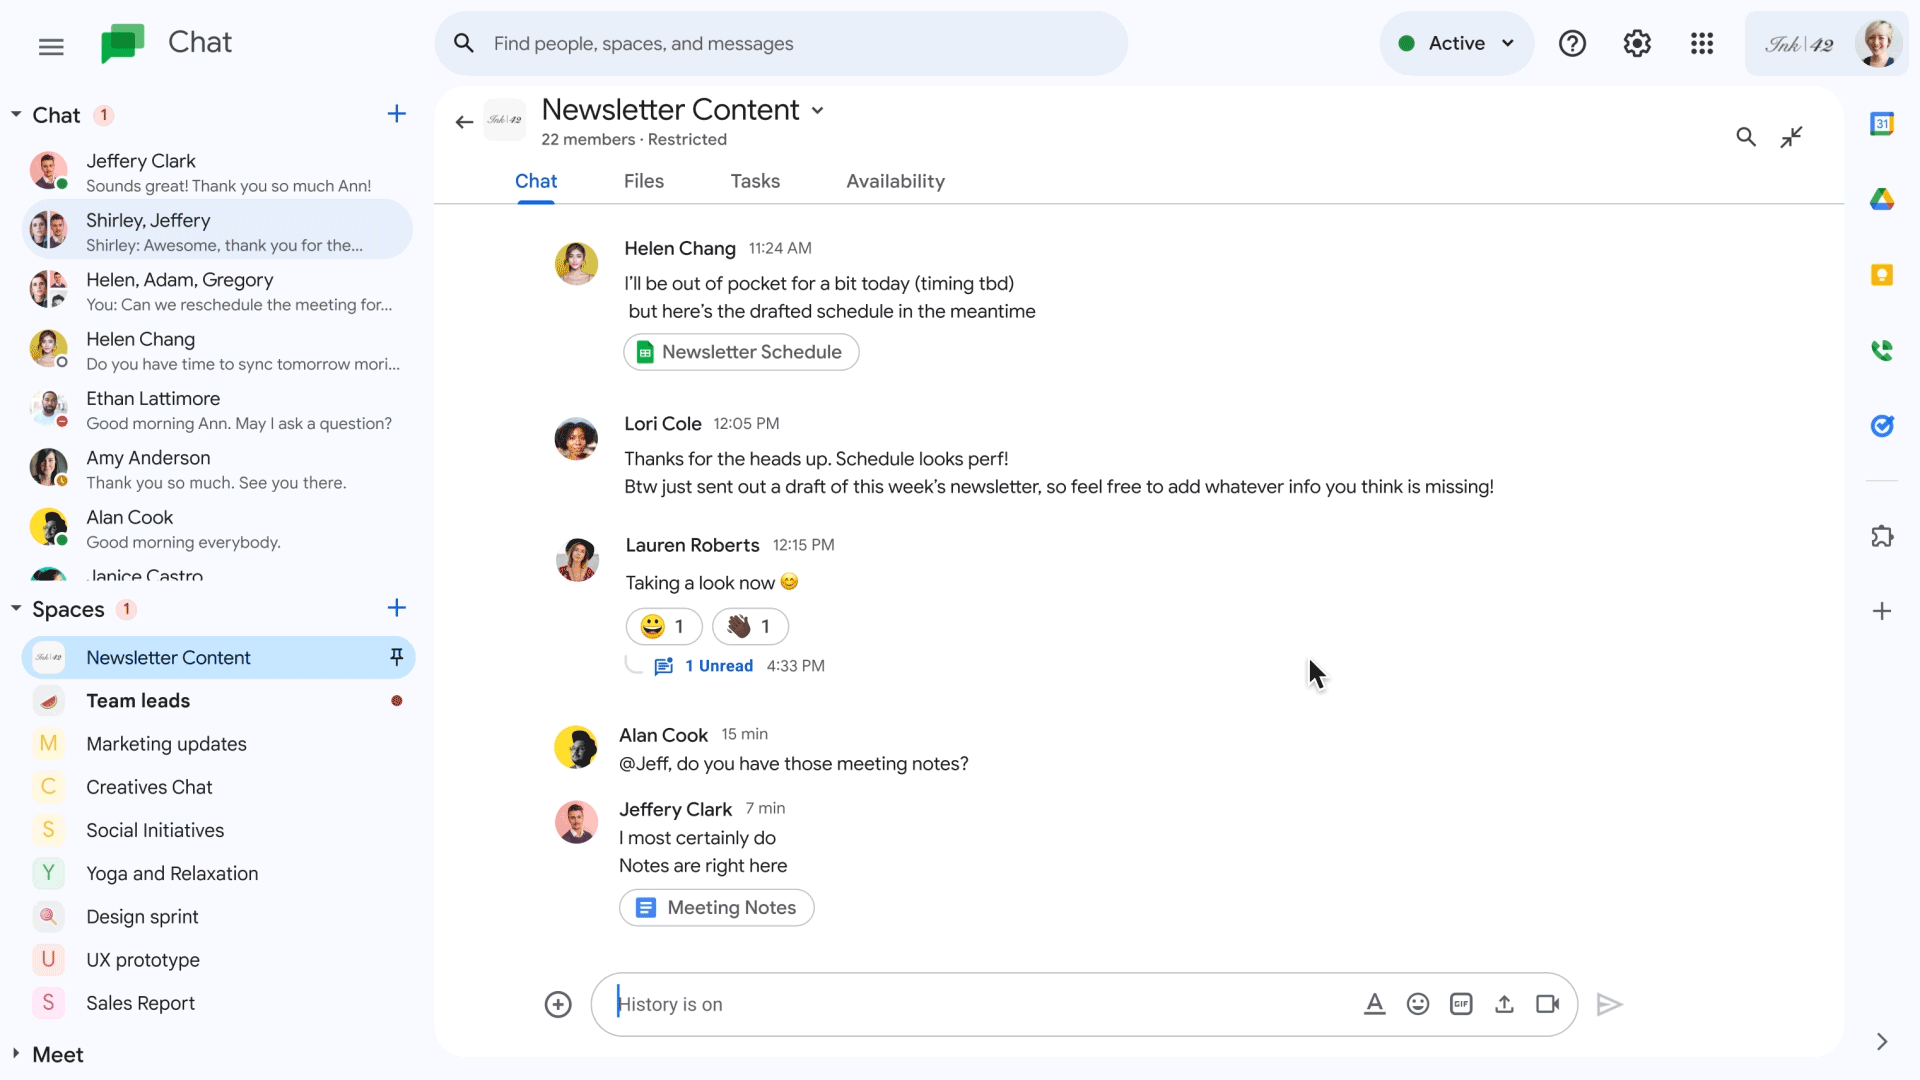 Quote a previous message in Google Chat